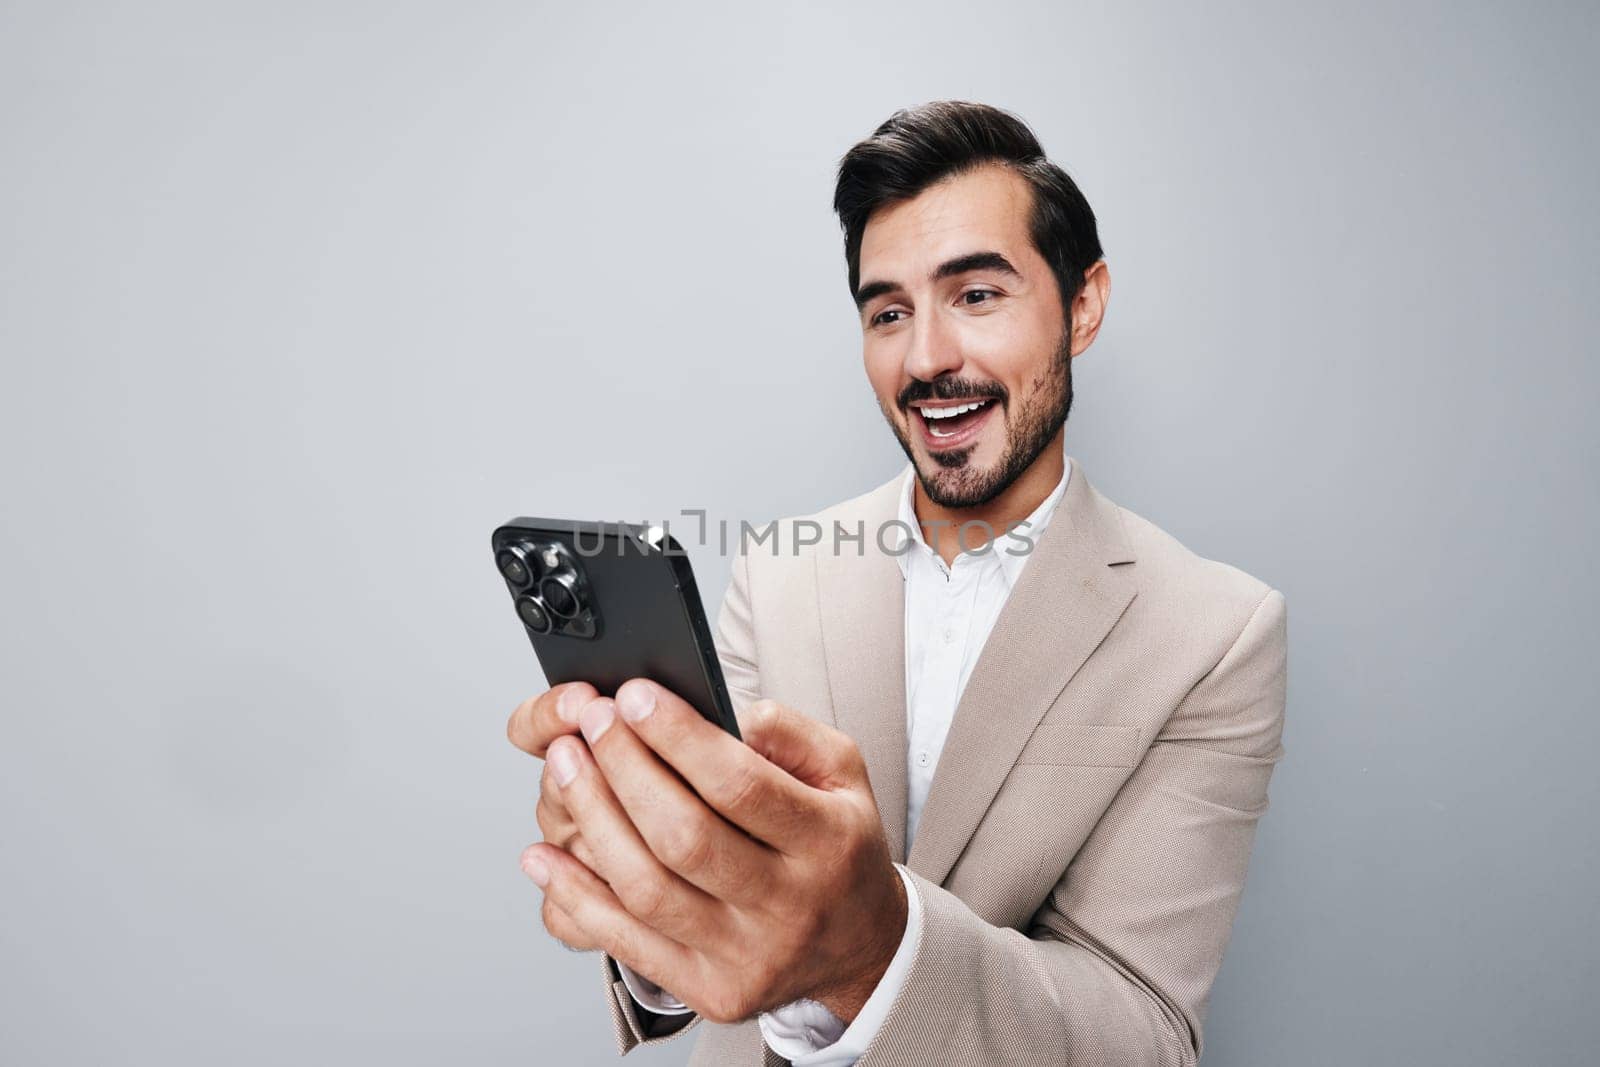 man connection happy gray smile call beard hold holding portrait phone app smartphone white suit phone guy mobile young businessman business background